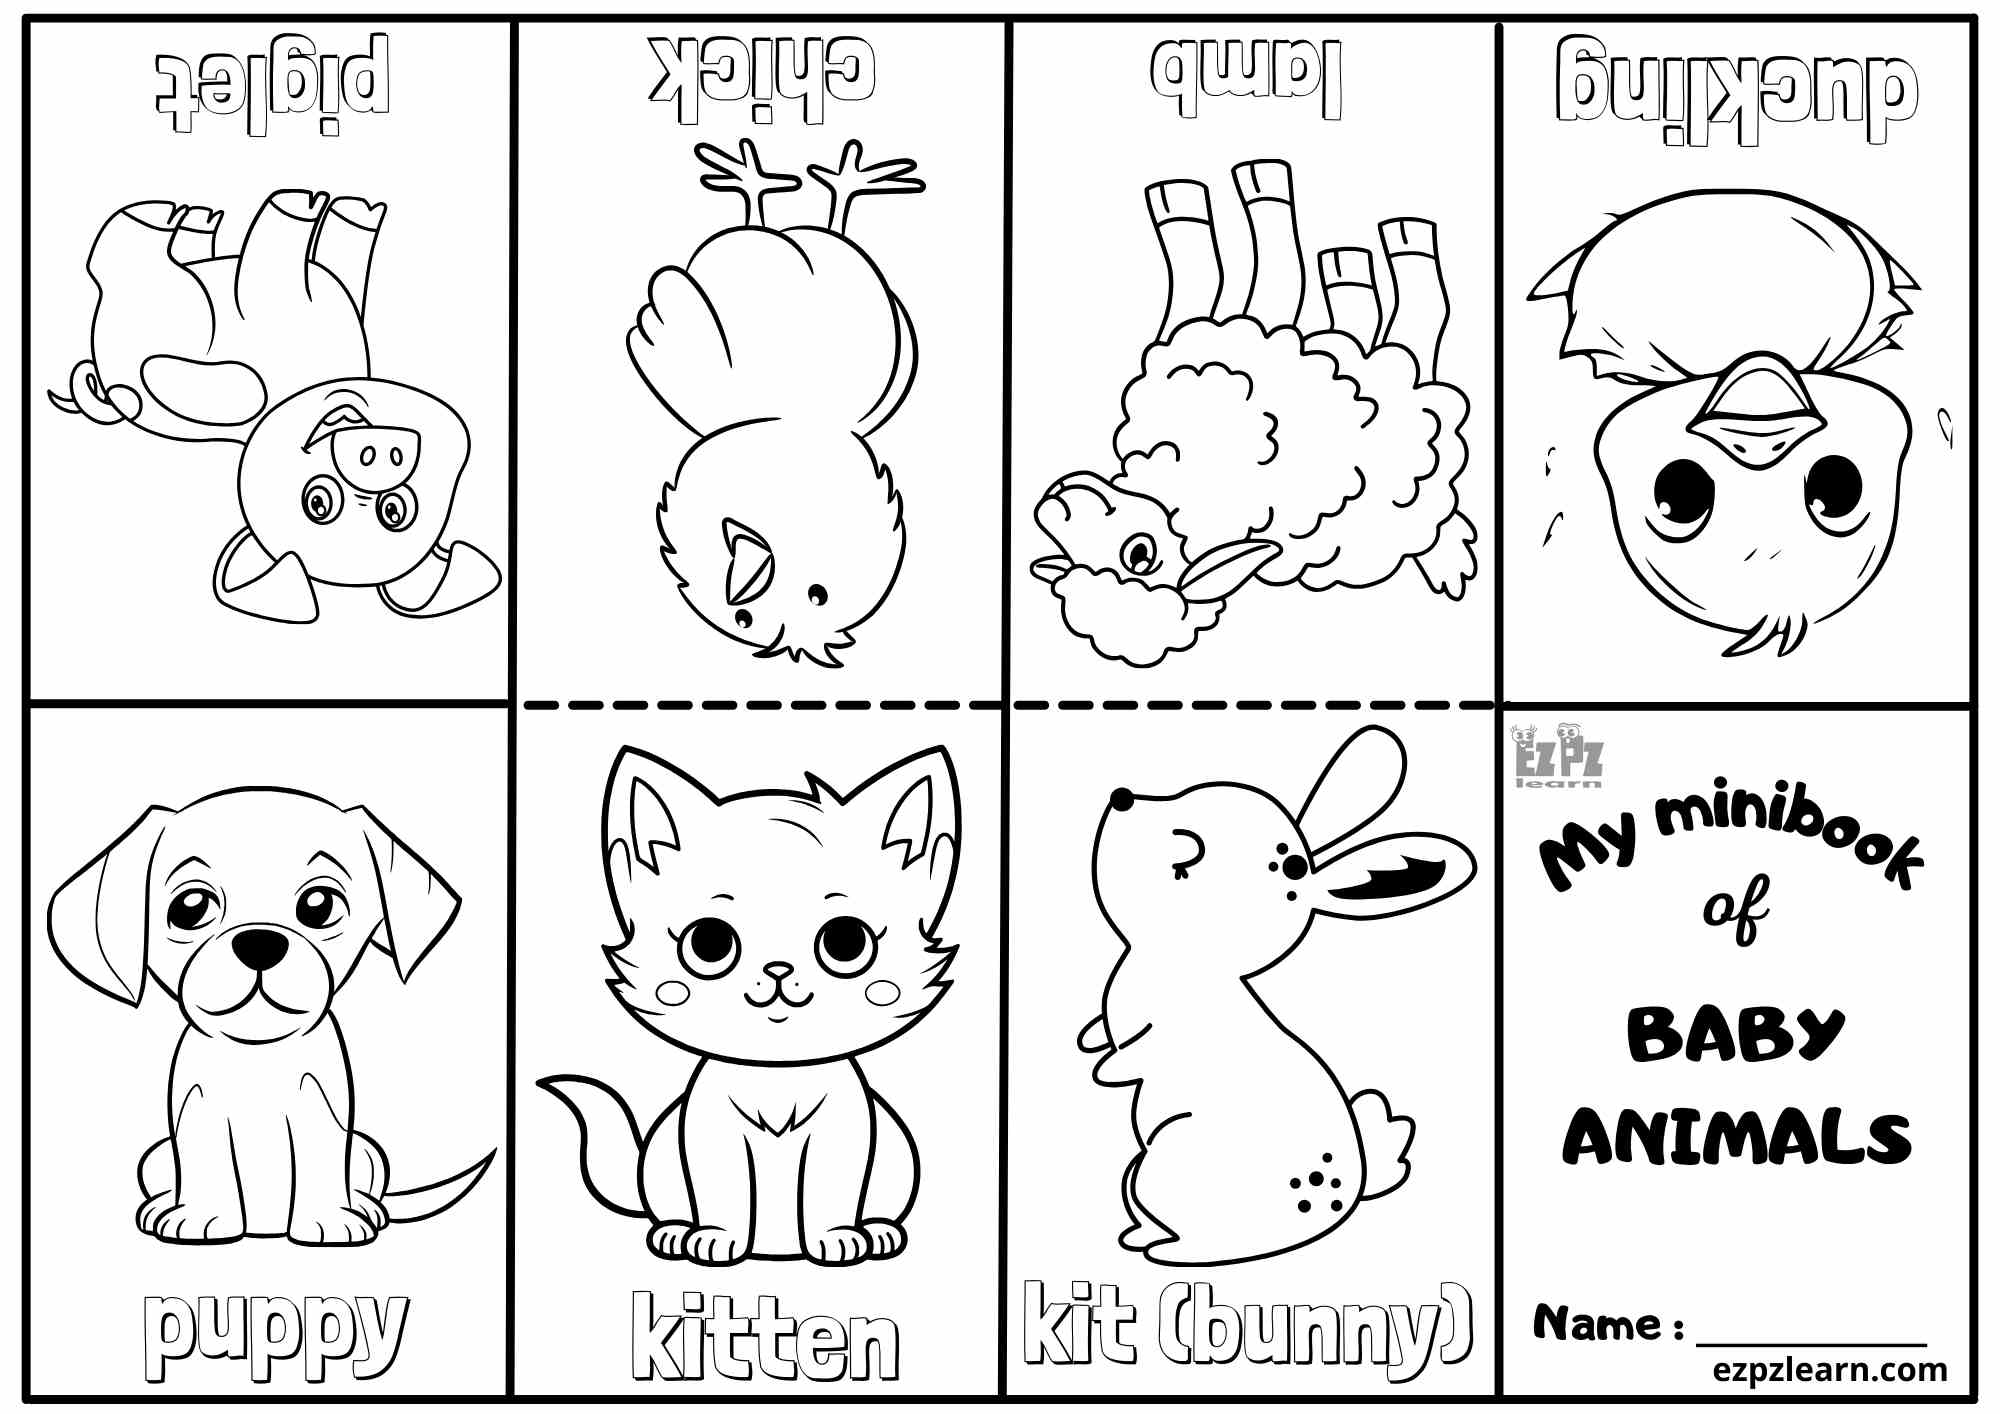 Coloring the animals